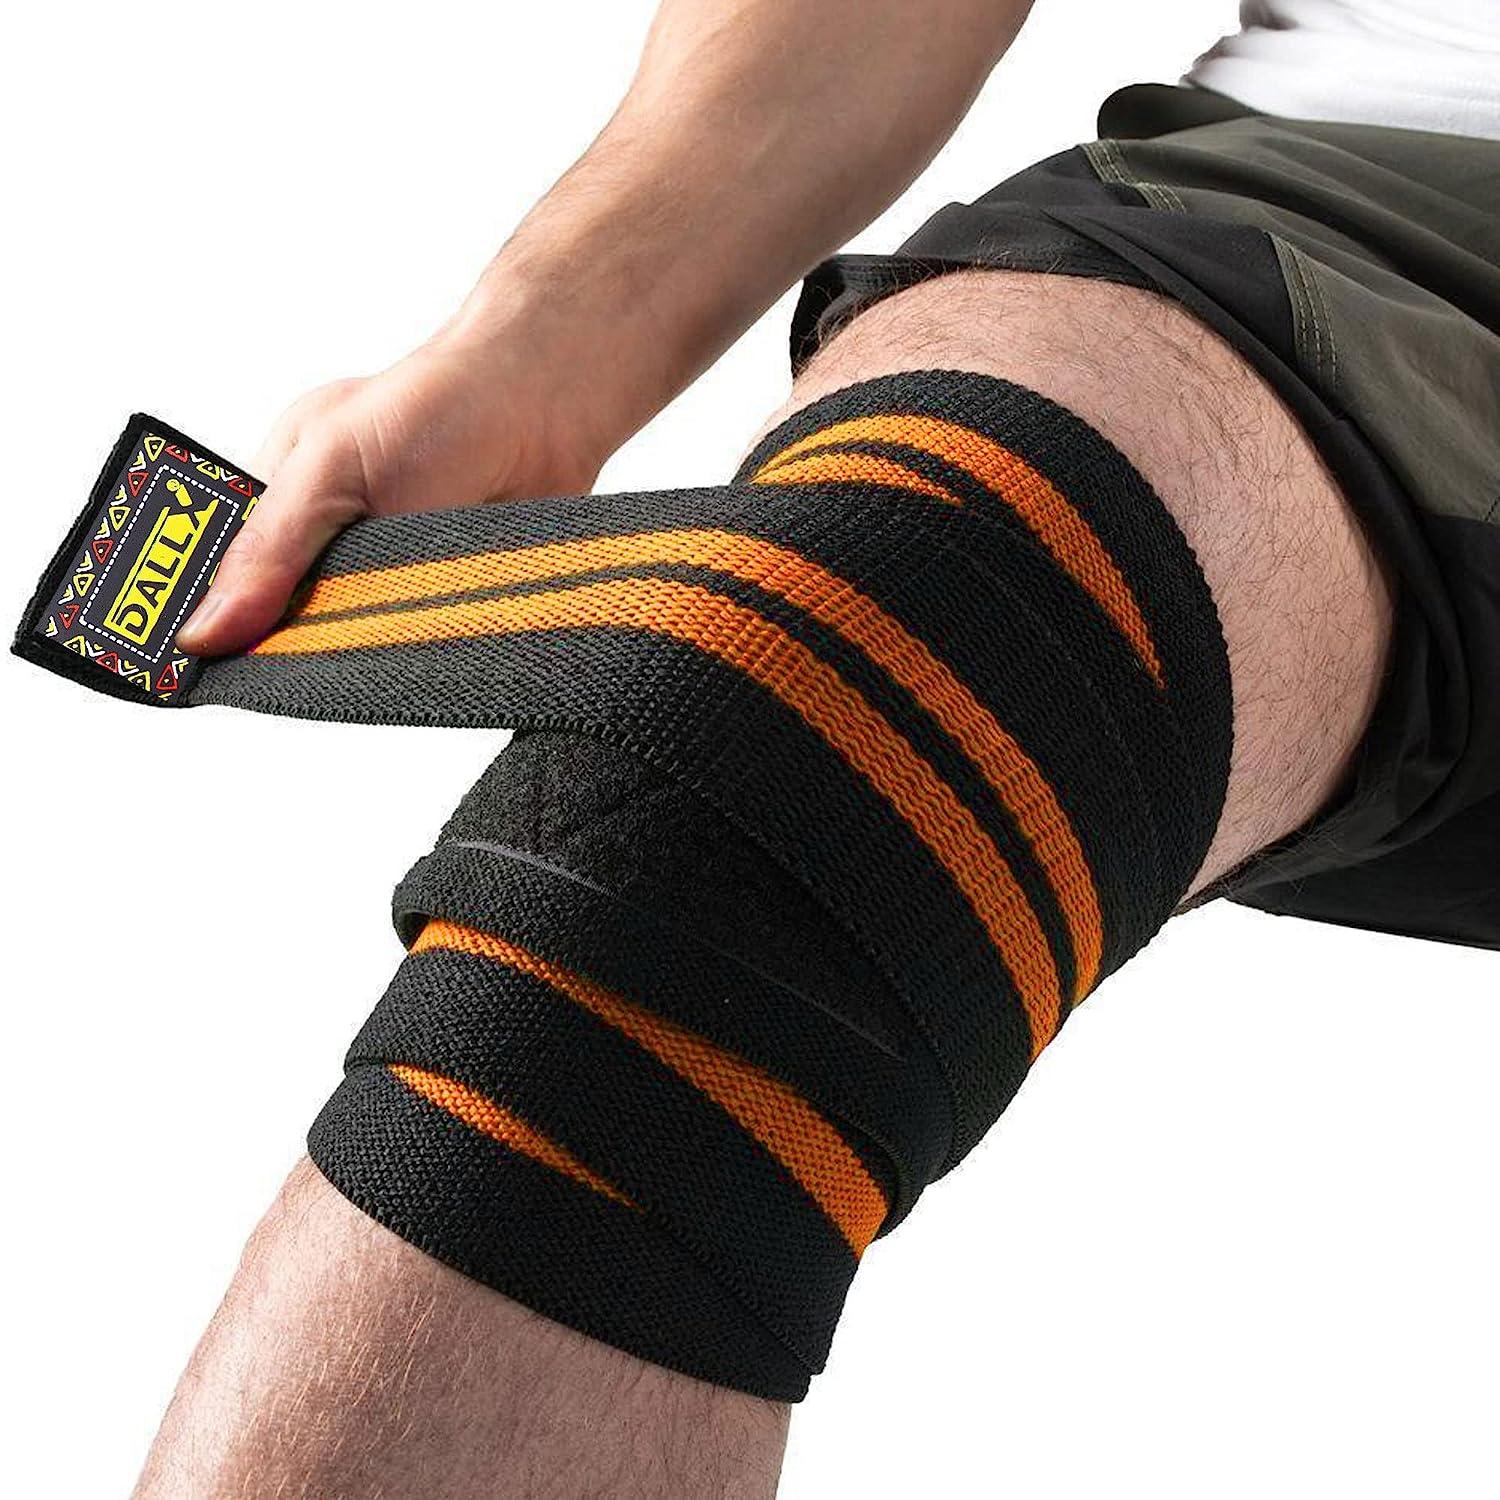 1pcs Sports Knee Compression Sleeve Leg Support Brace For Gym